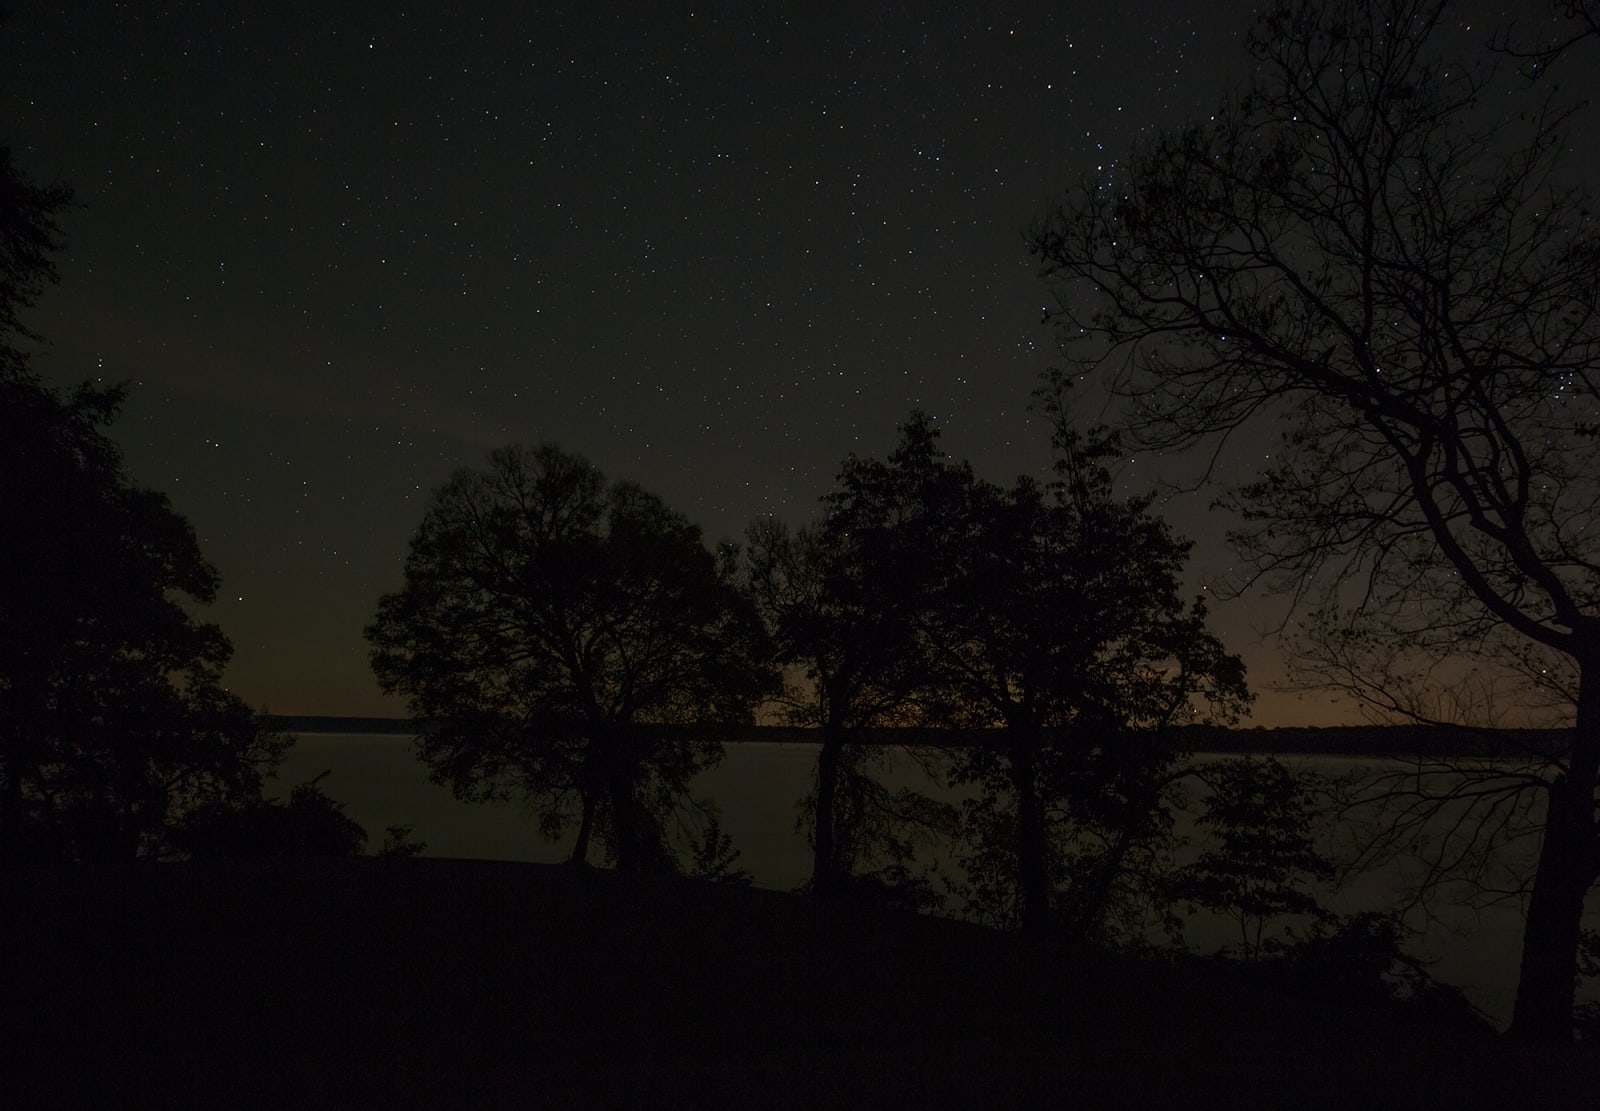 Jeanine Michna-Bales, Keep Going, 2014